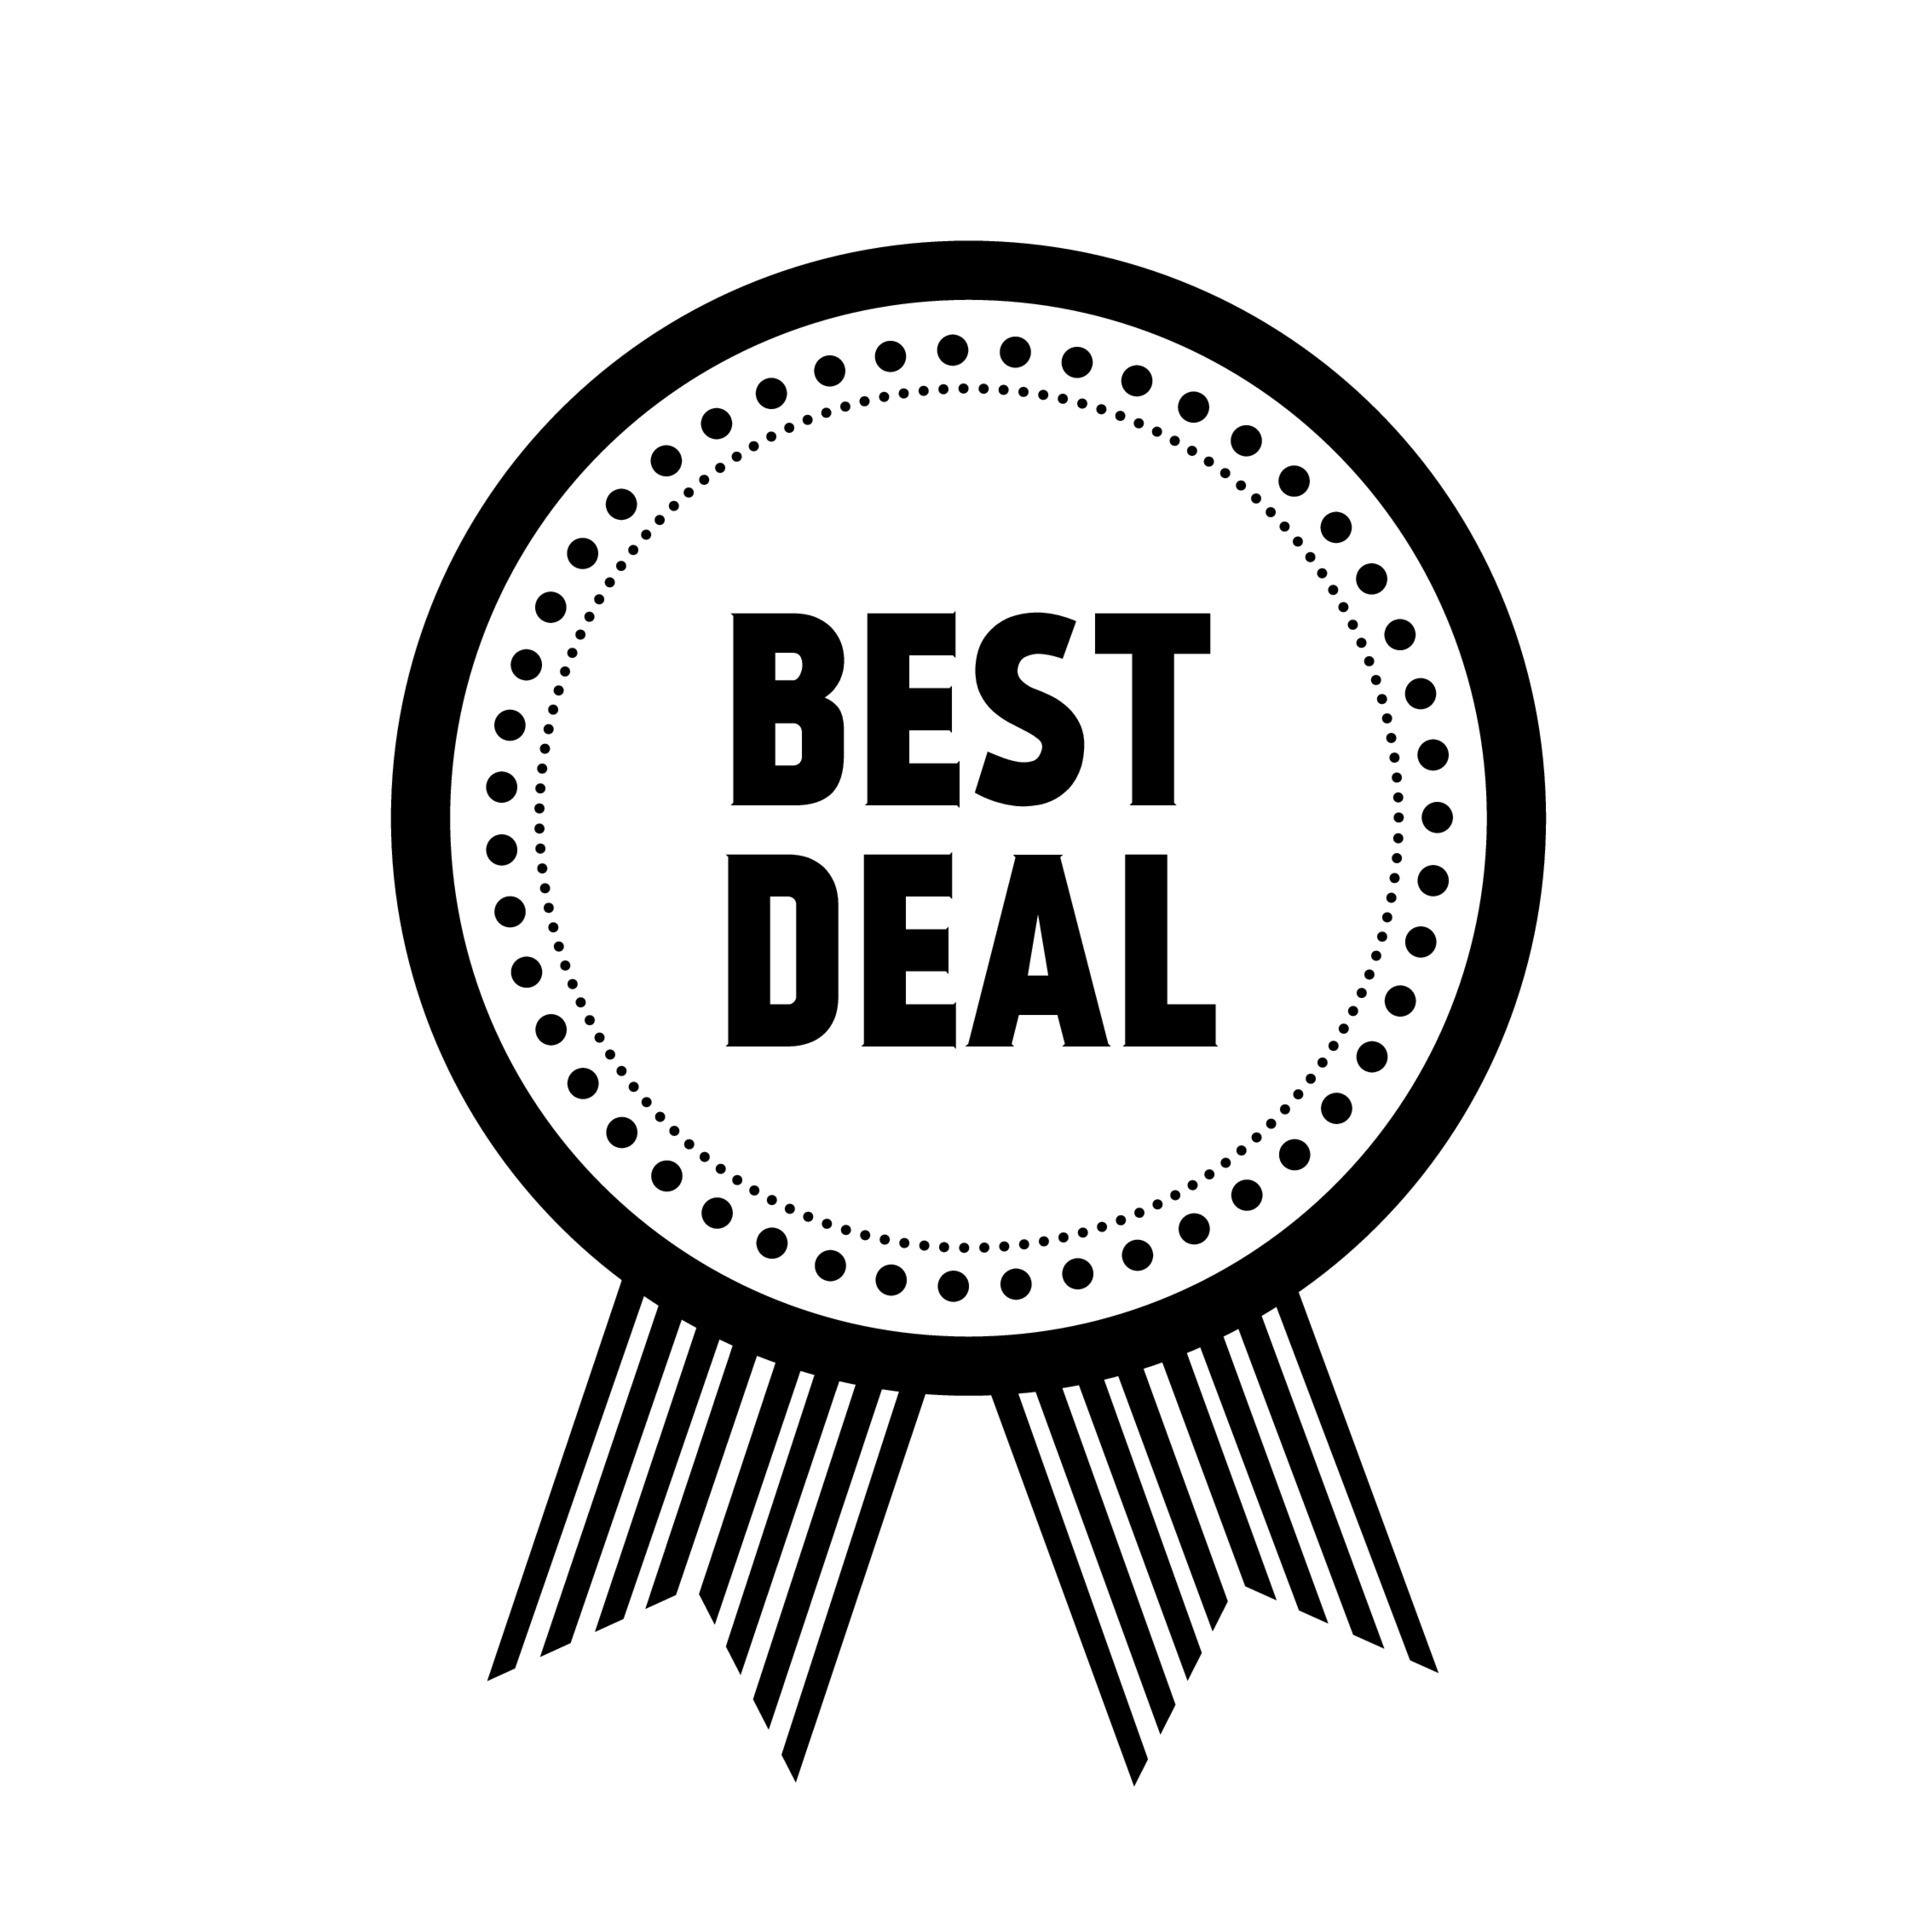 Best deal badge icon. Best deal banners, badge, sticker, sign, tag